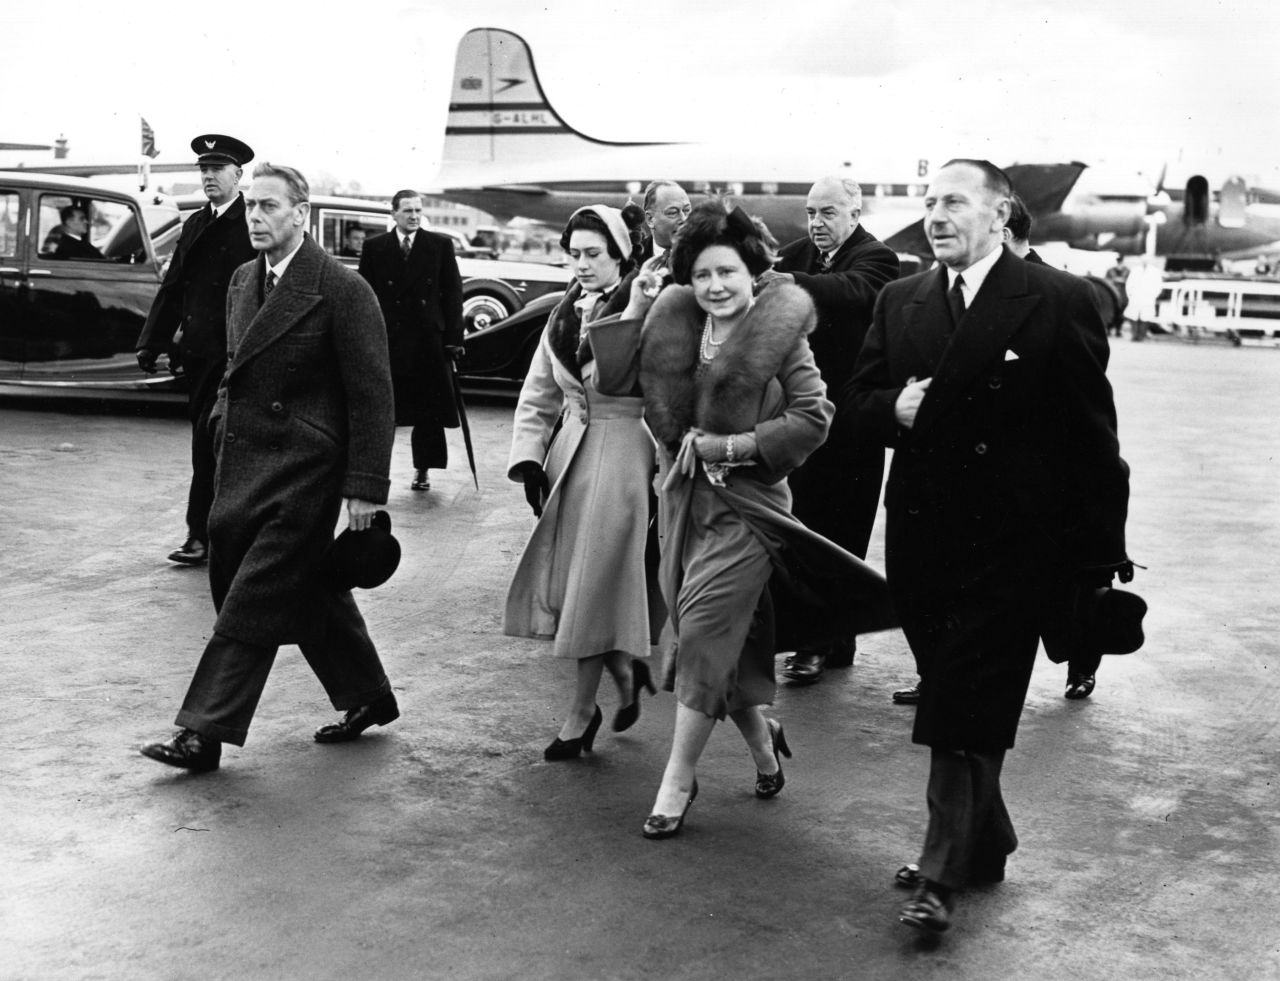 King George VI, left, is joined by his wife, Elizabeth, and Princess Margaret as he leaves an airport in London on January 31, 1952. They had waved farewell to Princess Elizabeth and her husband, Prince Philip, who were heading on a royal tour.